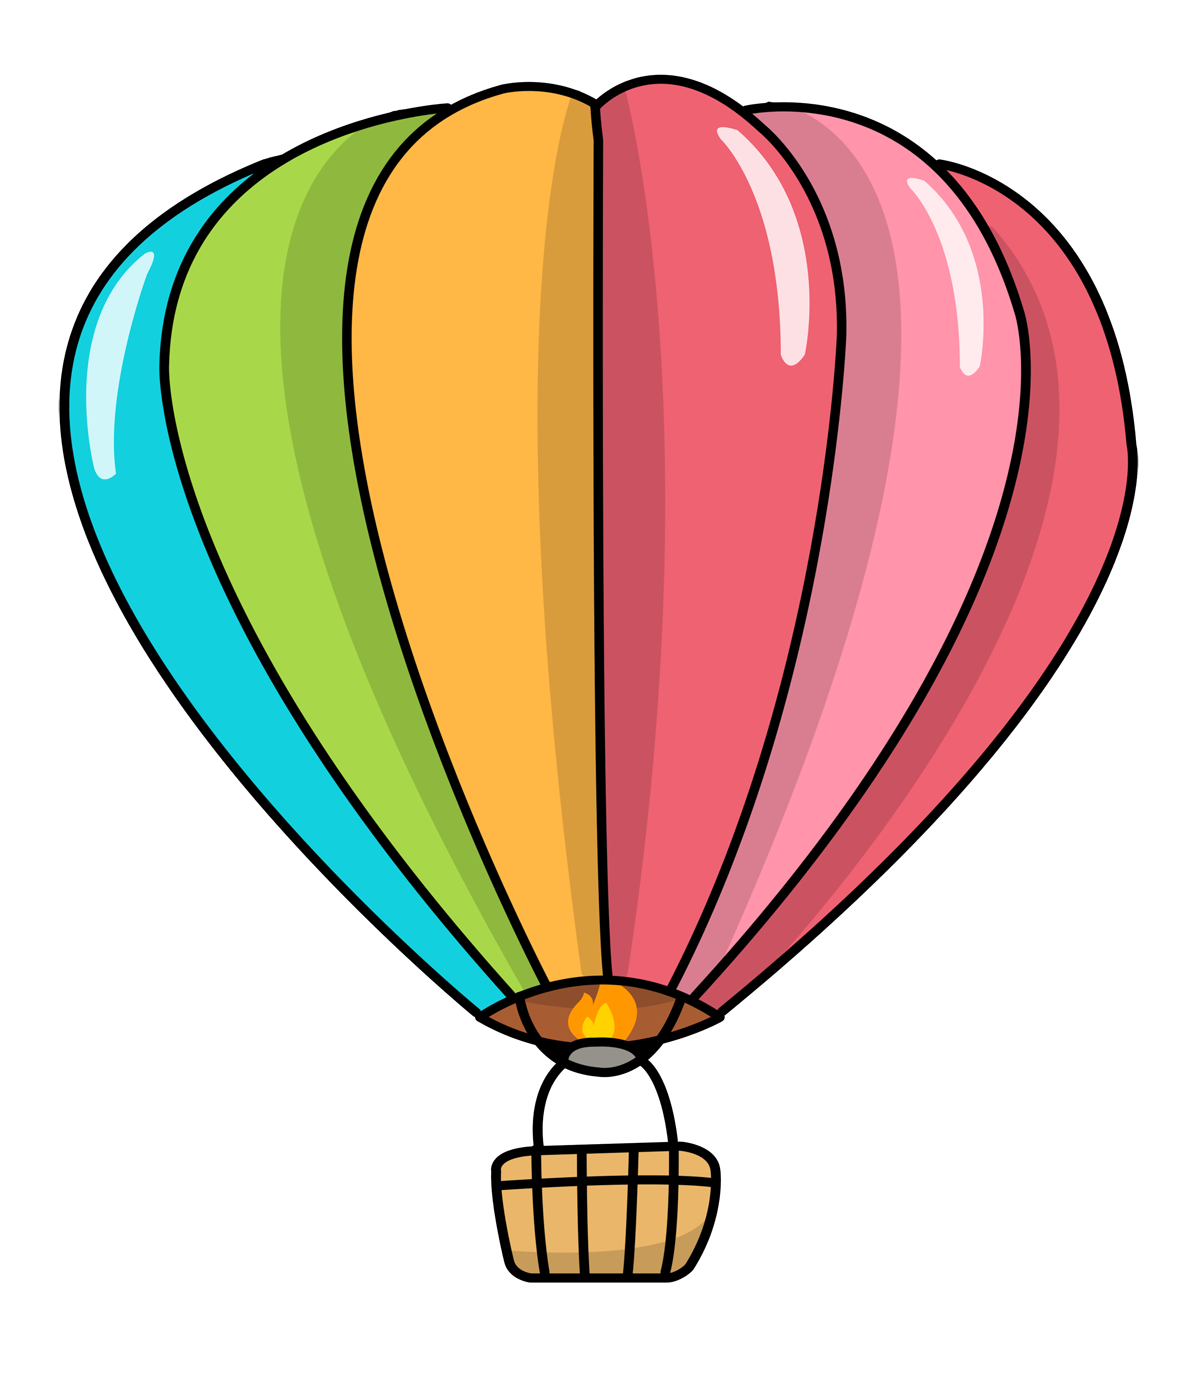 Cartoon Picture Of Balloon - ClipArt Best